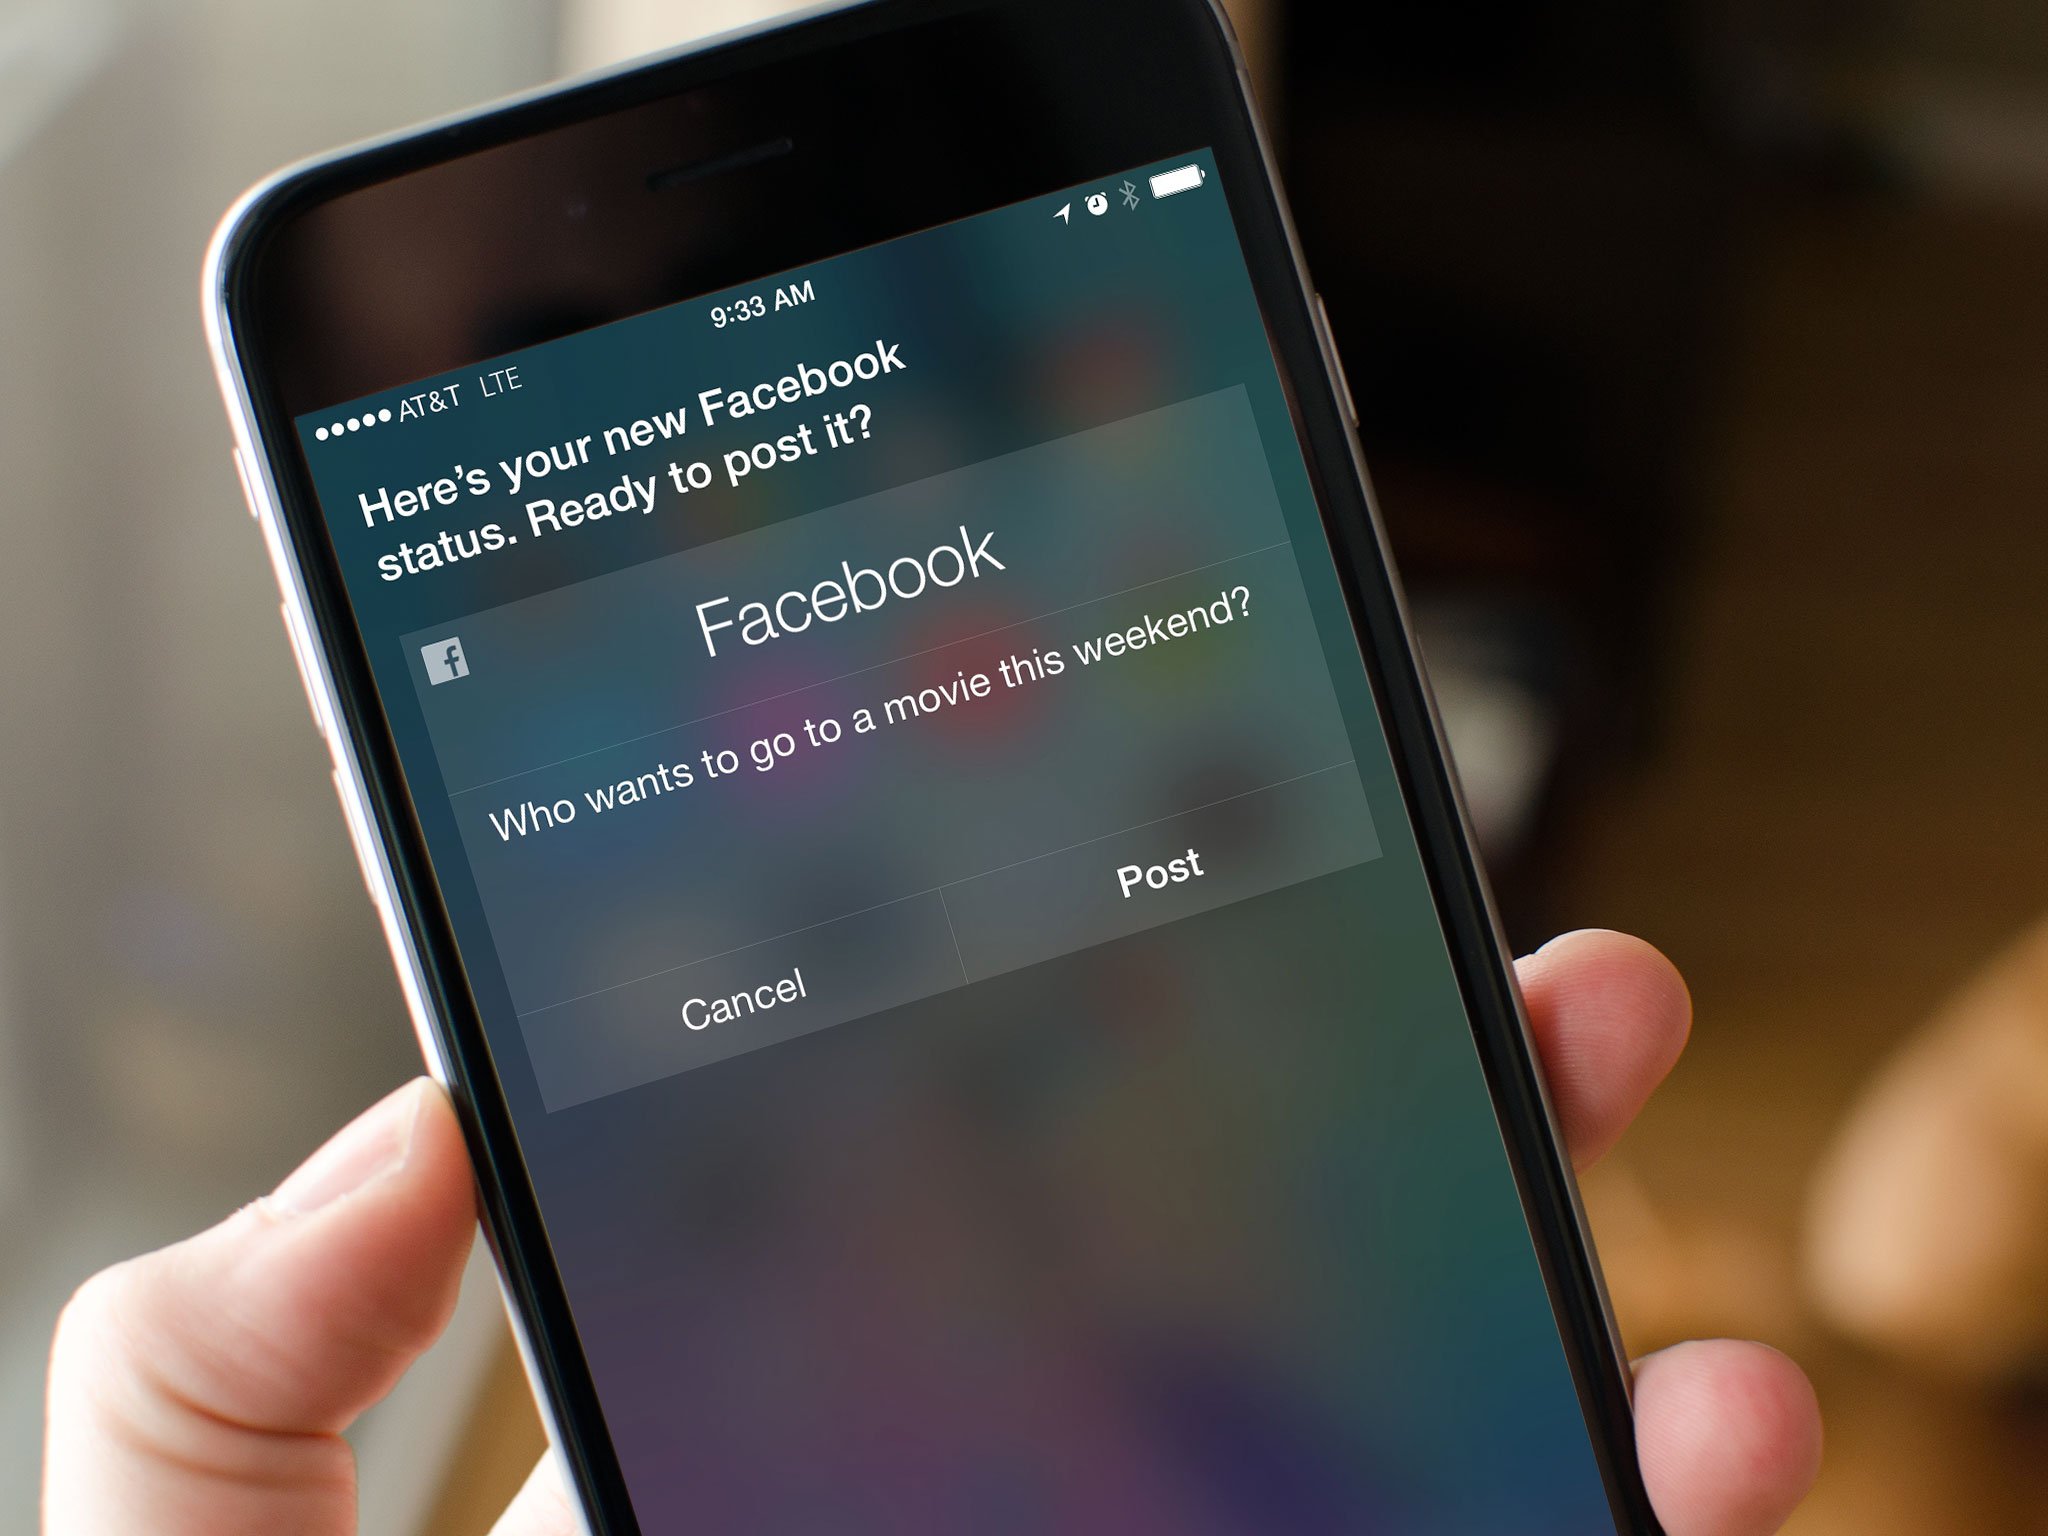 How to update your Facebook status with Siri